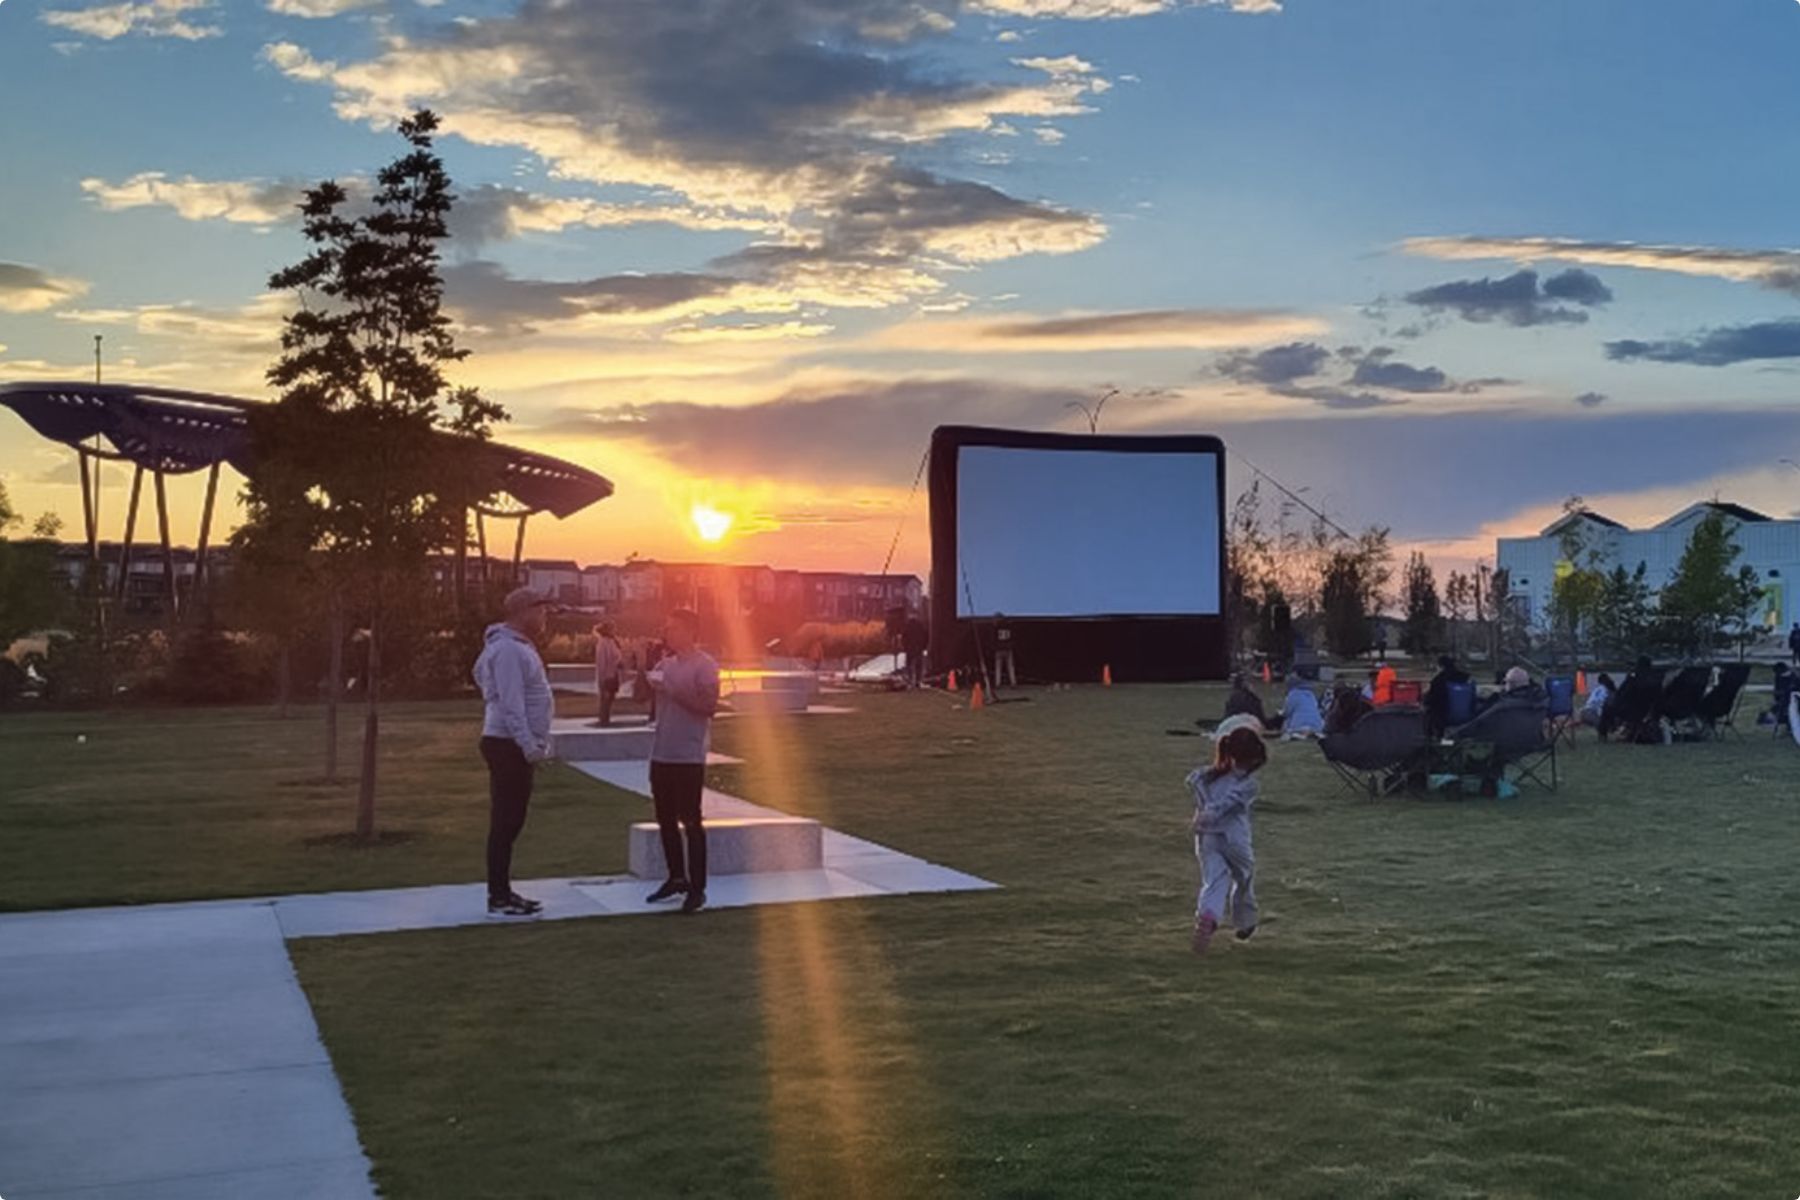 Outdoor park setting, sunset and families, movie screen